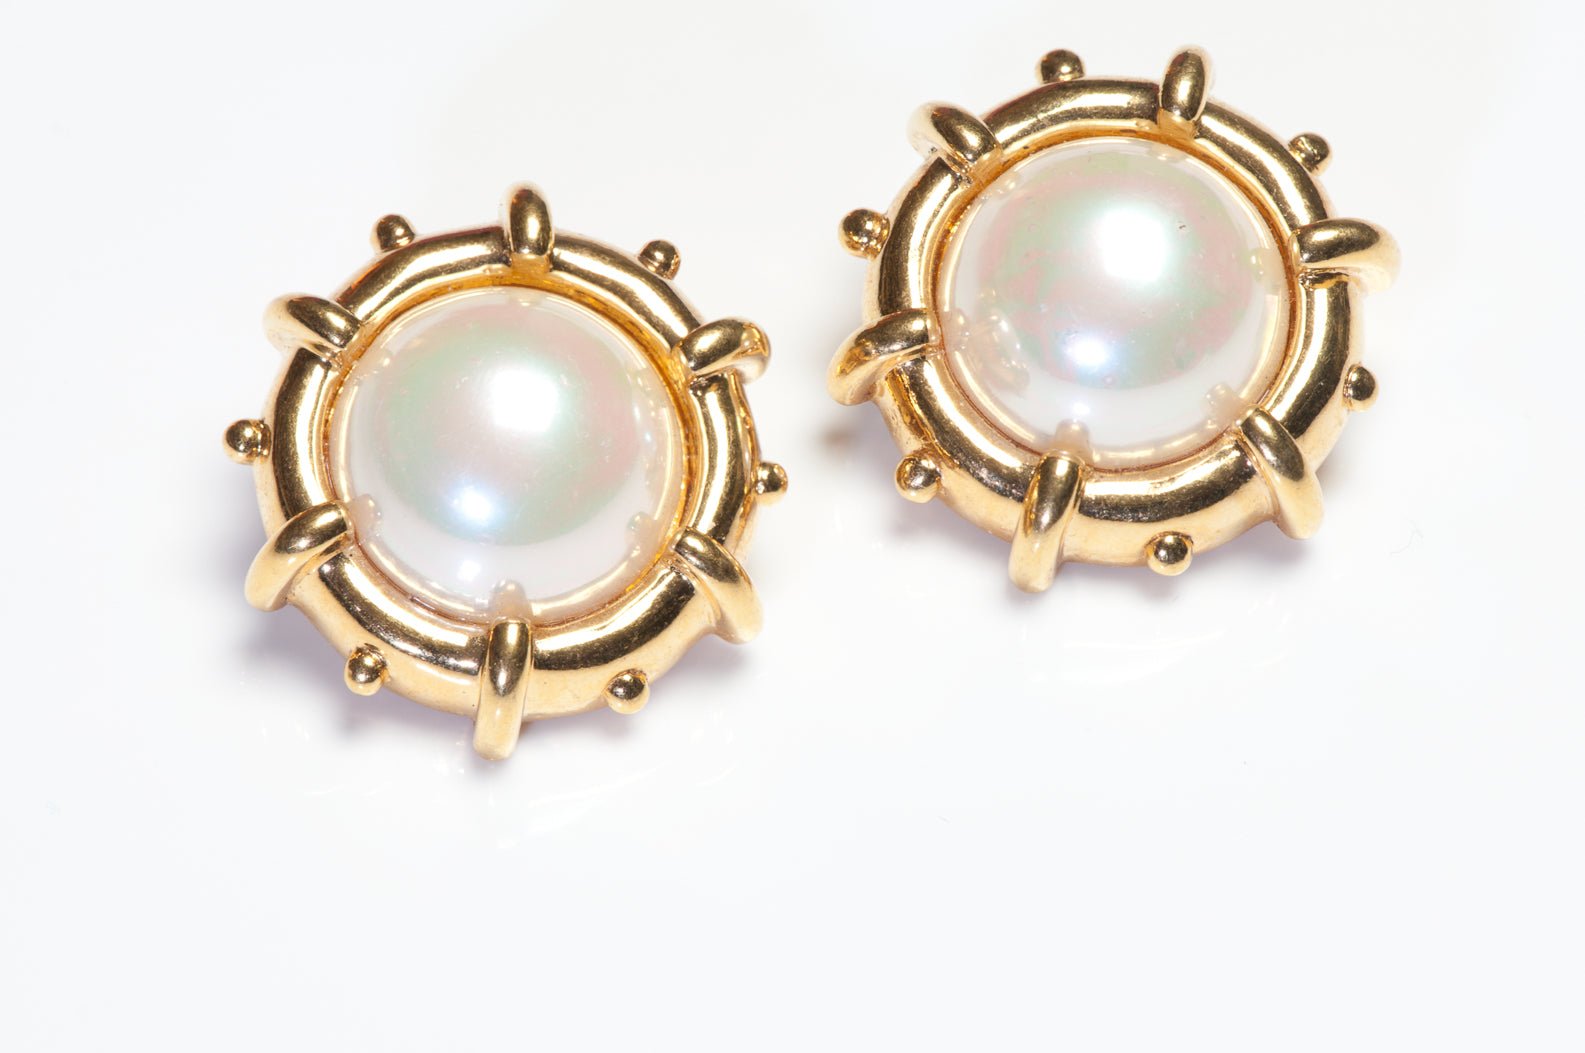 Vintage Nina Ricci Gold Plated Faux Mabe Pearl Earrings